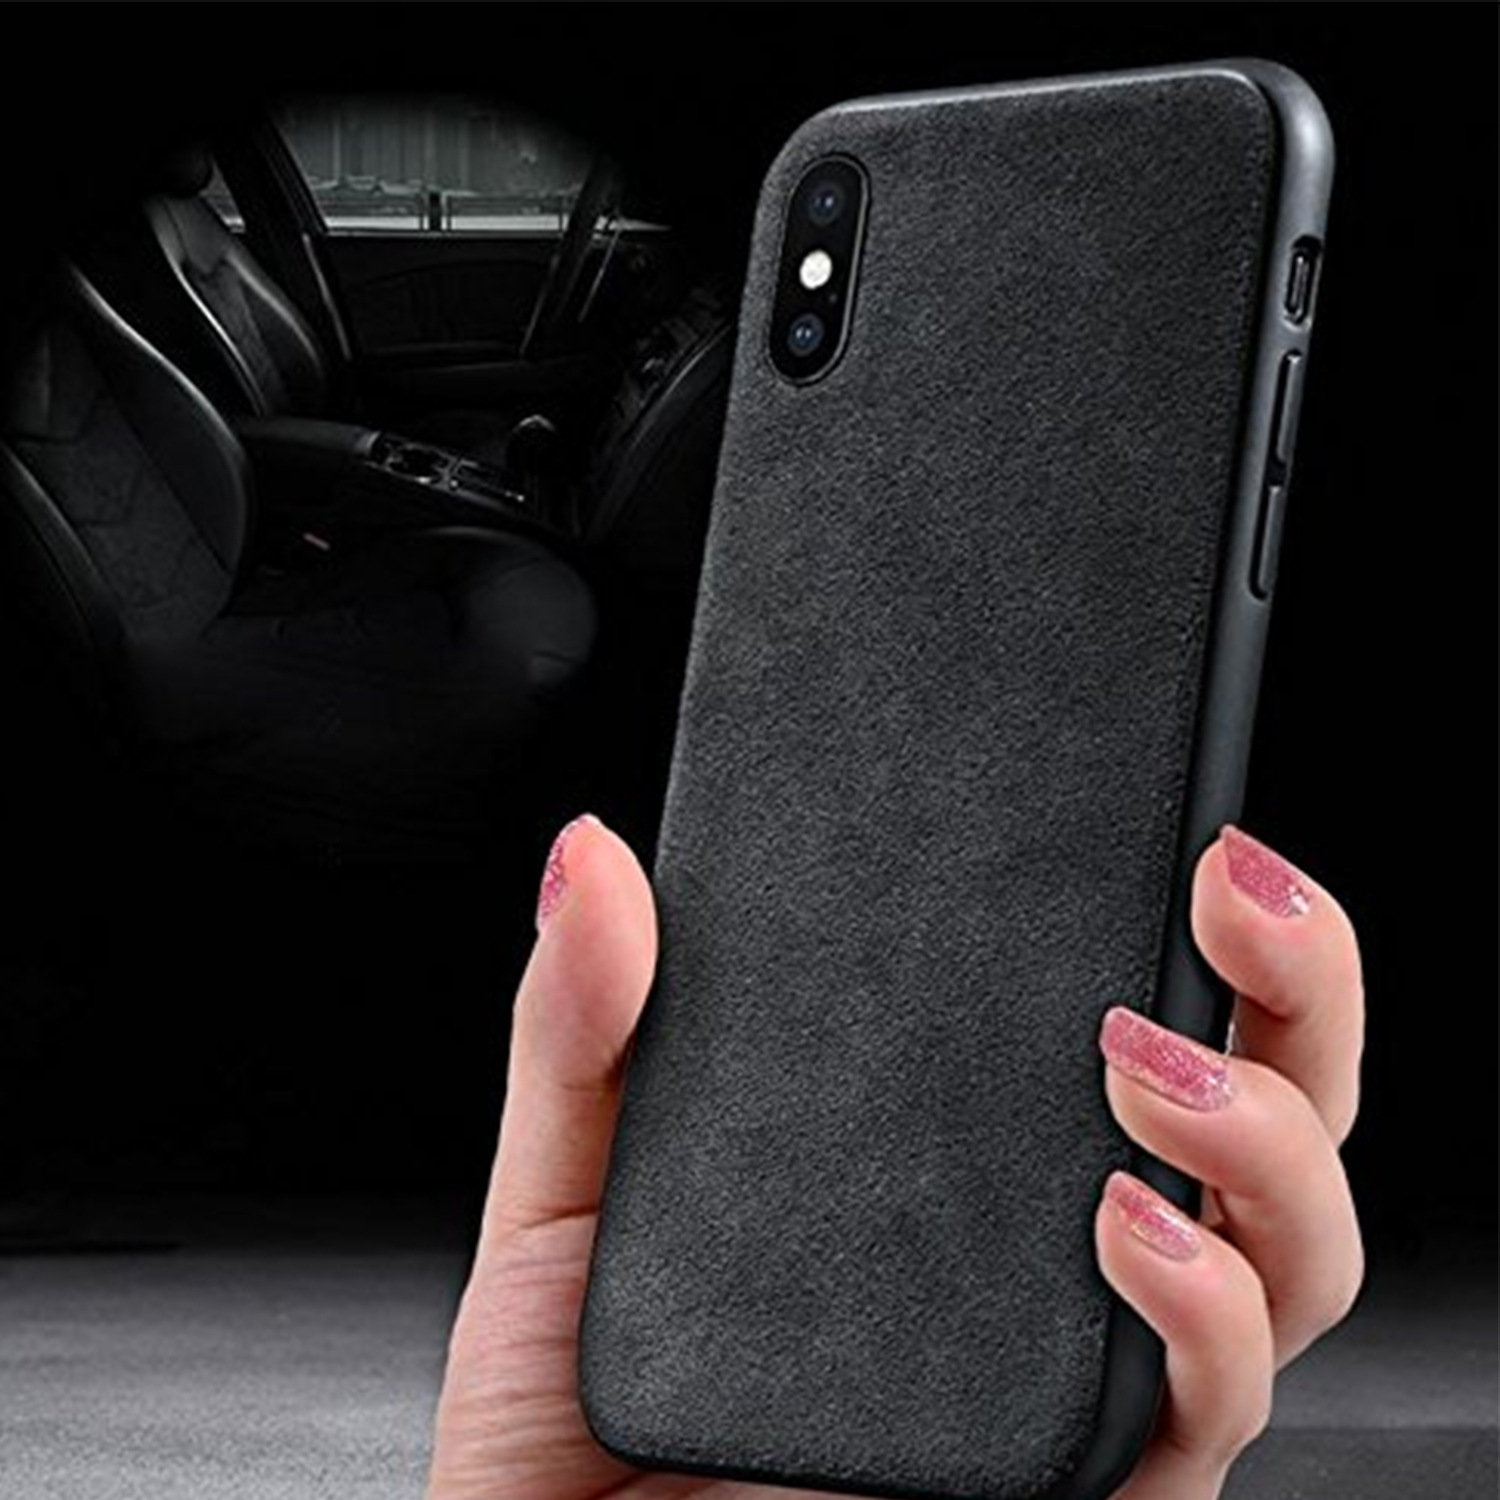 Maybach Alcantara Protective Designer iPhone Case For All iPhone Models